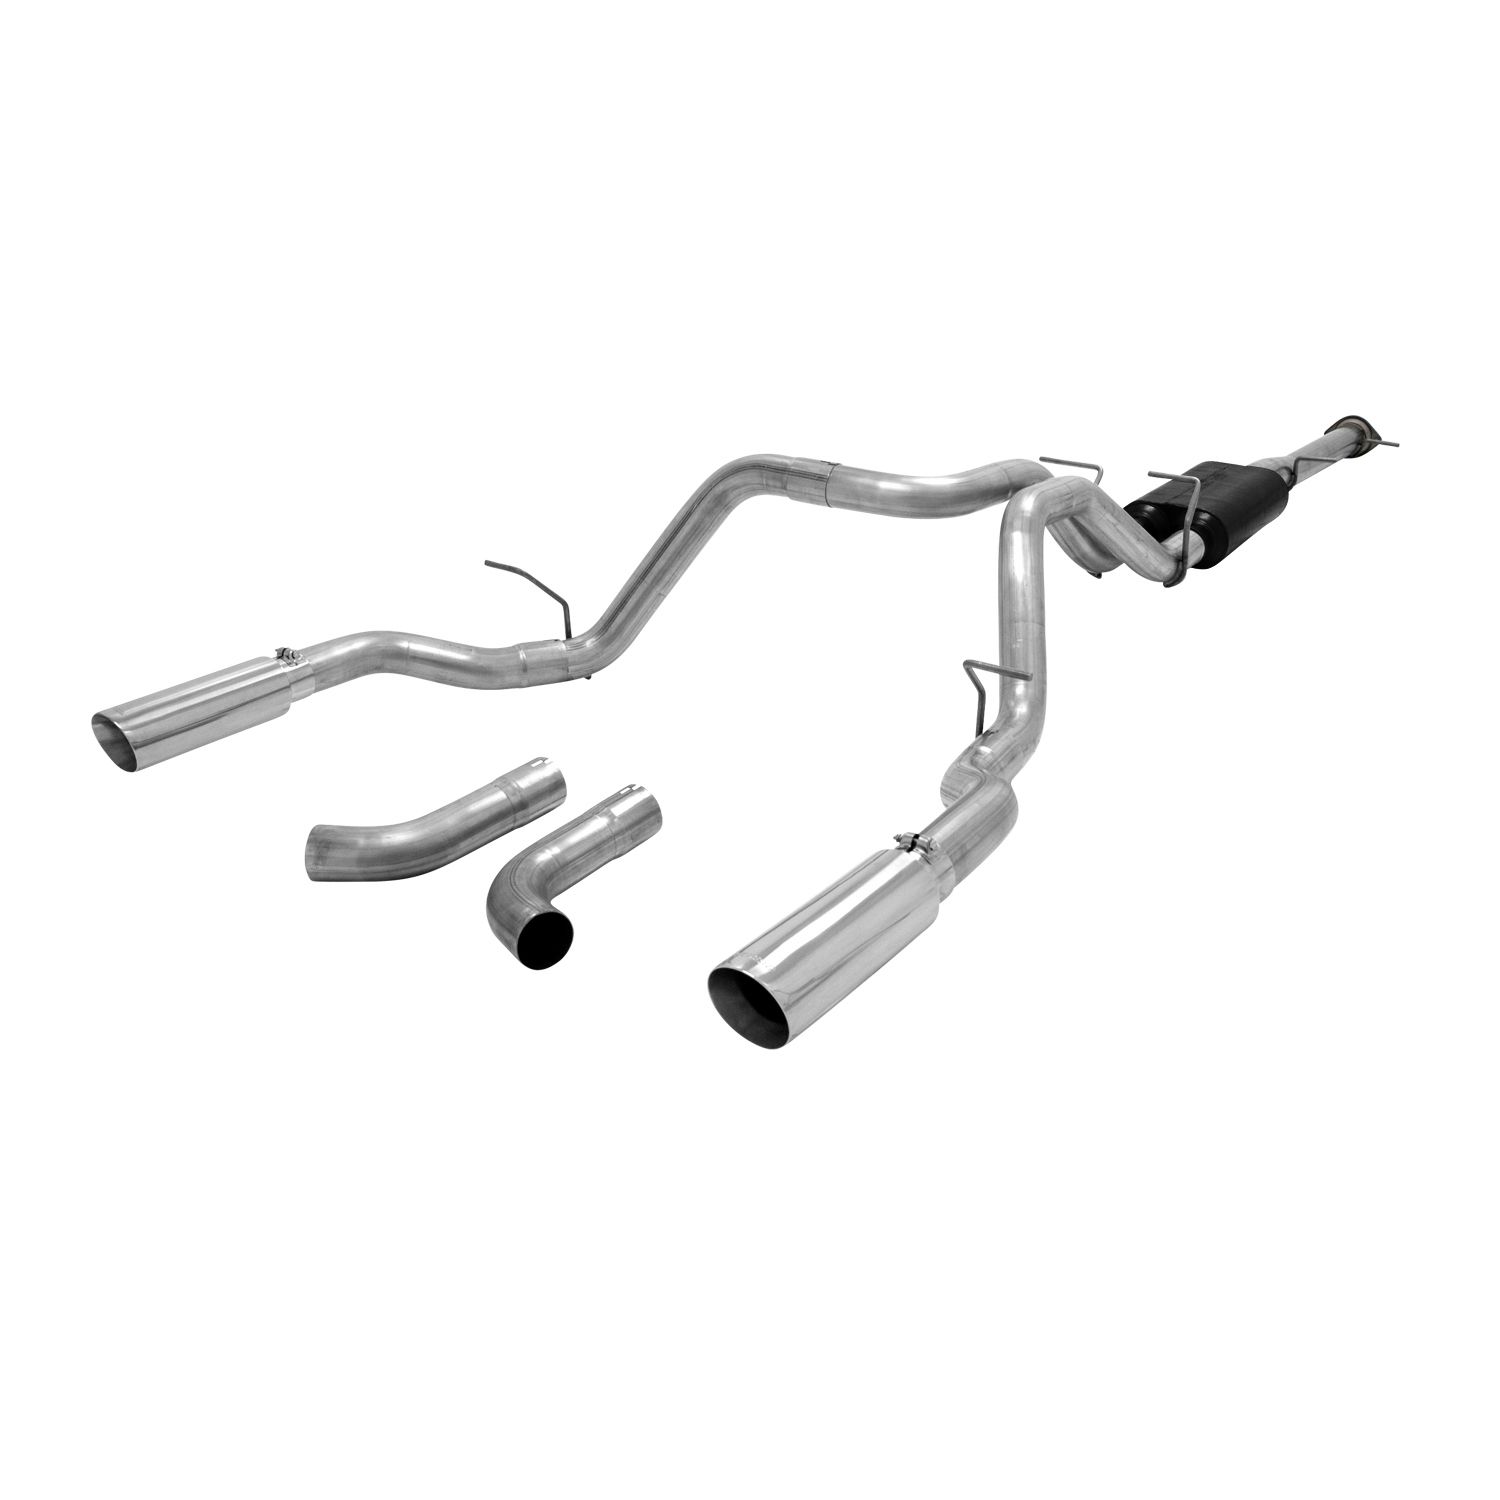 2016-2019 Chevrolet Silverado 3500 HD High Country/LT/LTZ/WT 6.0L Crew Cab Flowmaster American Thunder Cat-Back Exhaust 78.8 inch Bed - 817541